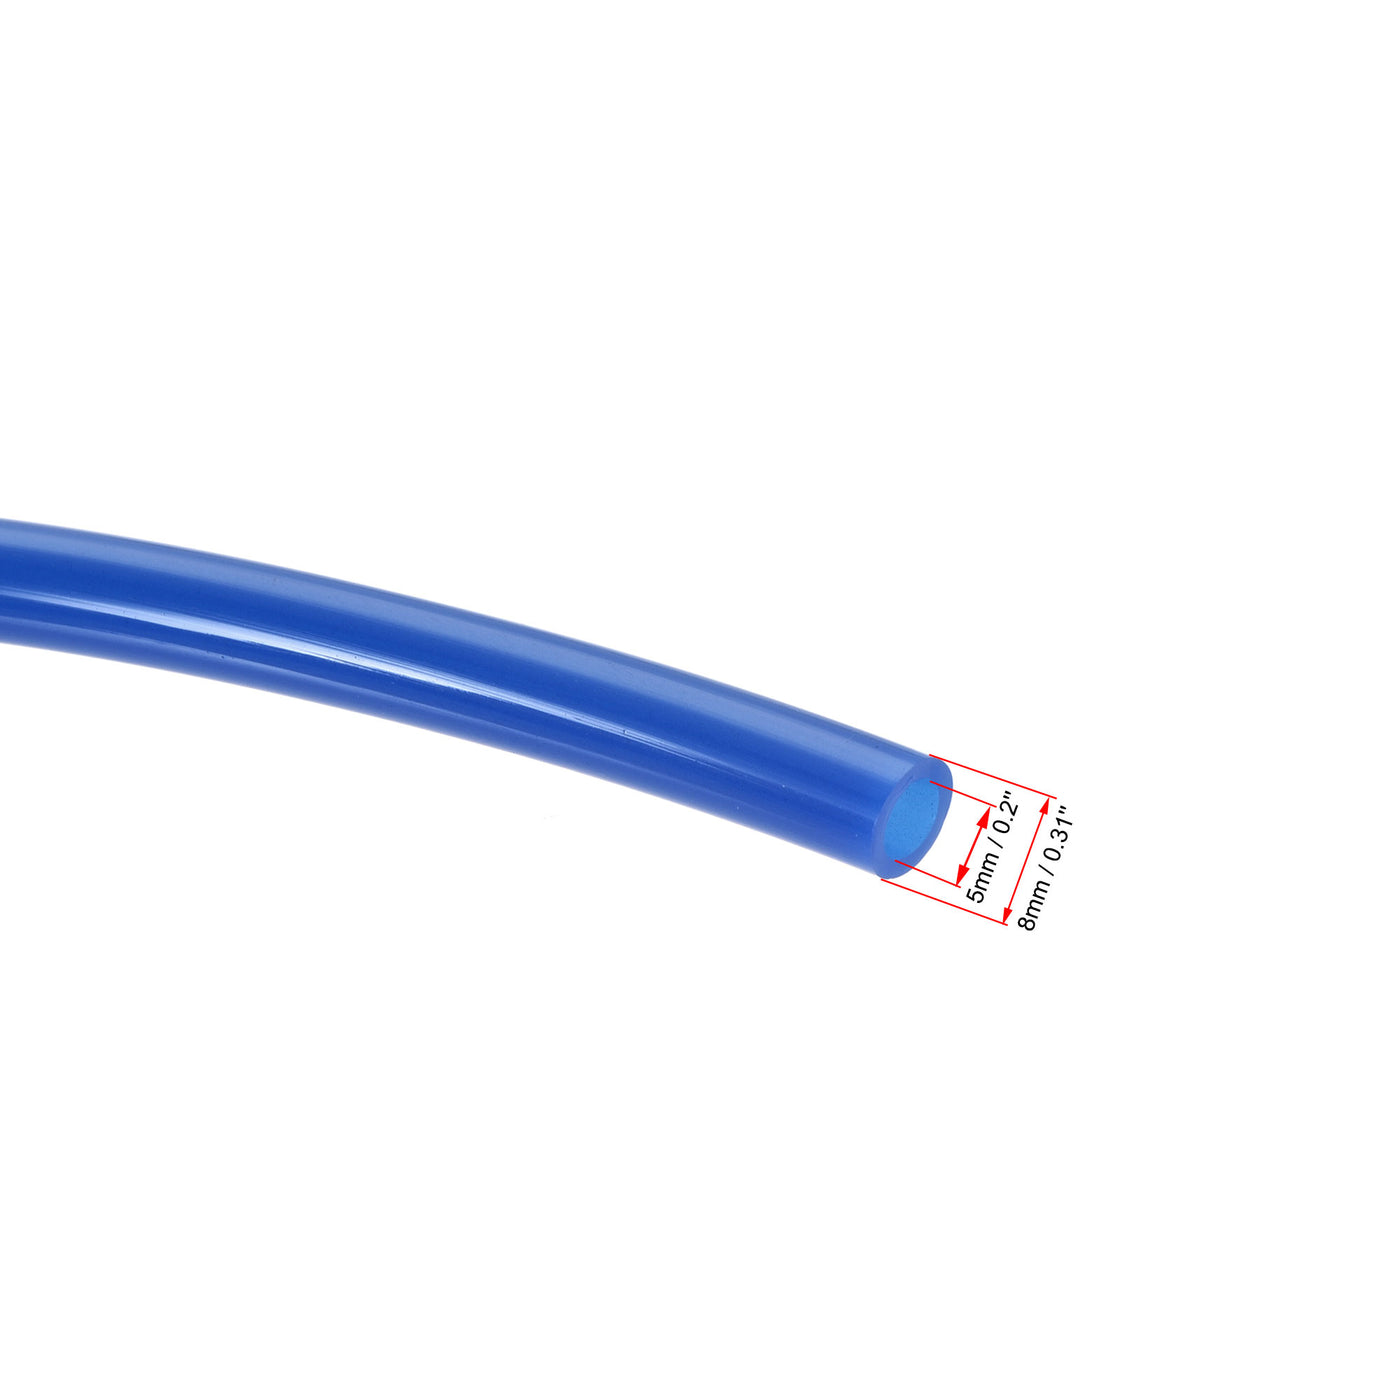 uxcell Uxcell Pneumatic 8mm OD PU Air Hose Tubing Kit 5 Meters Blue with 12 Pcs Push to Connect Fittings